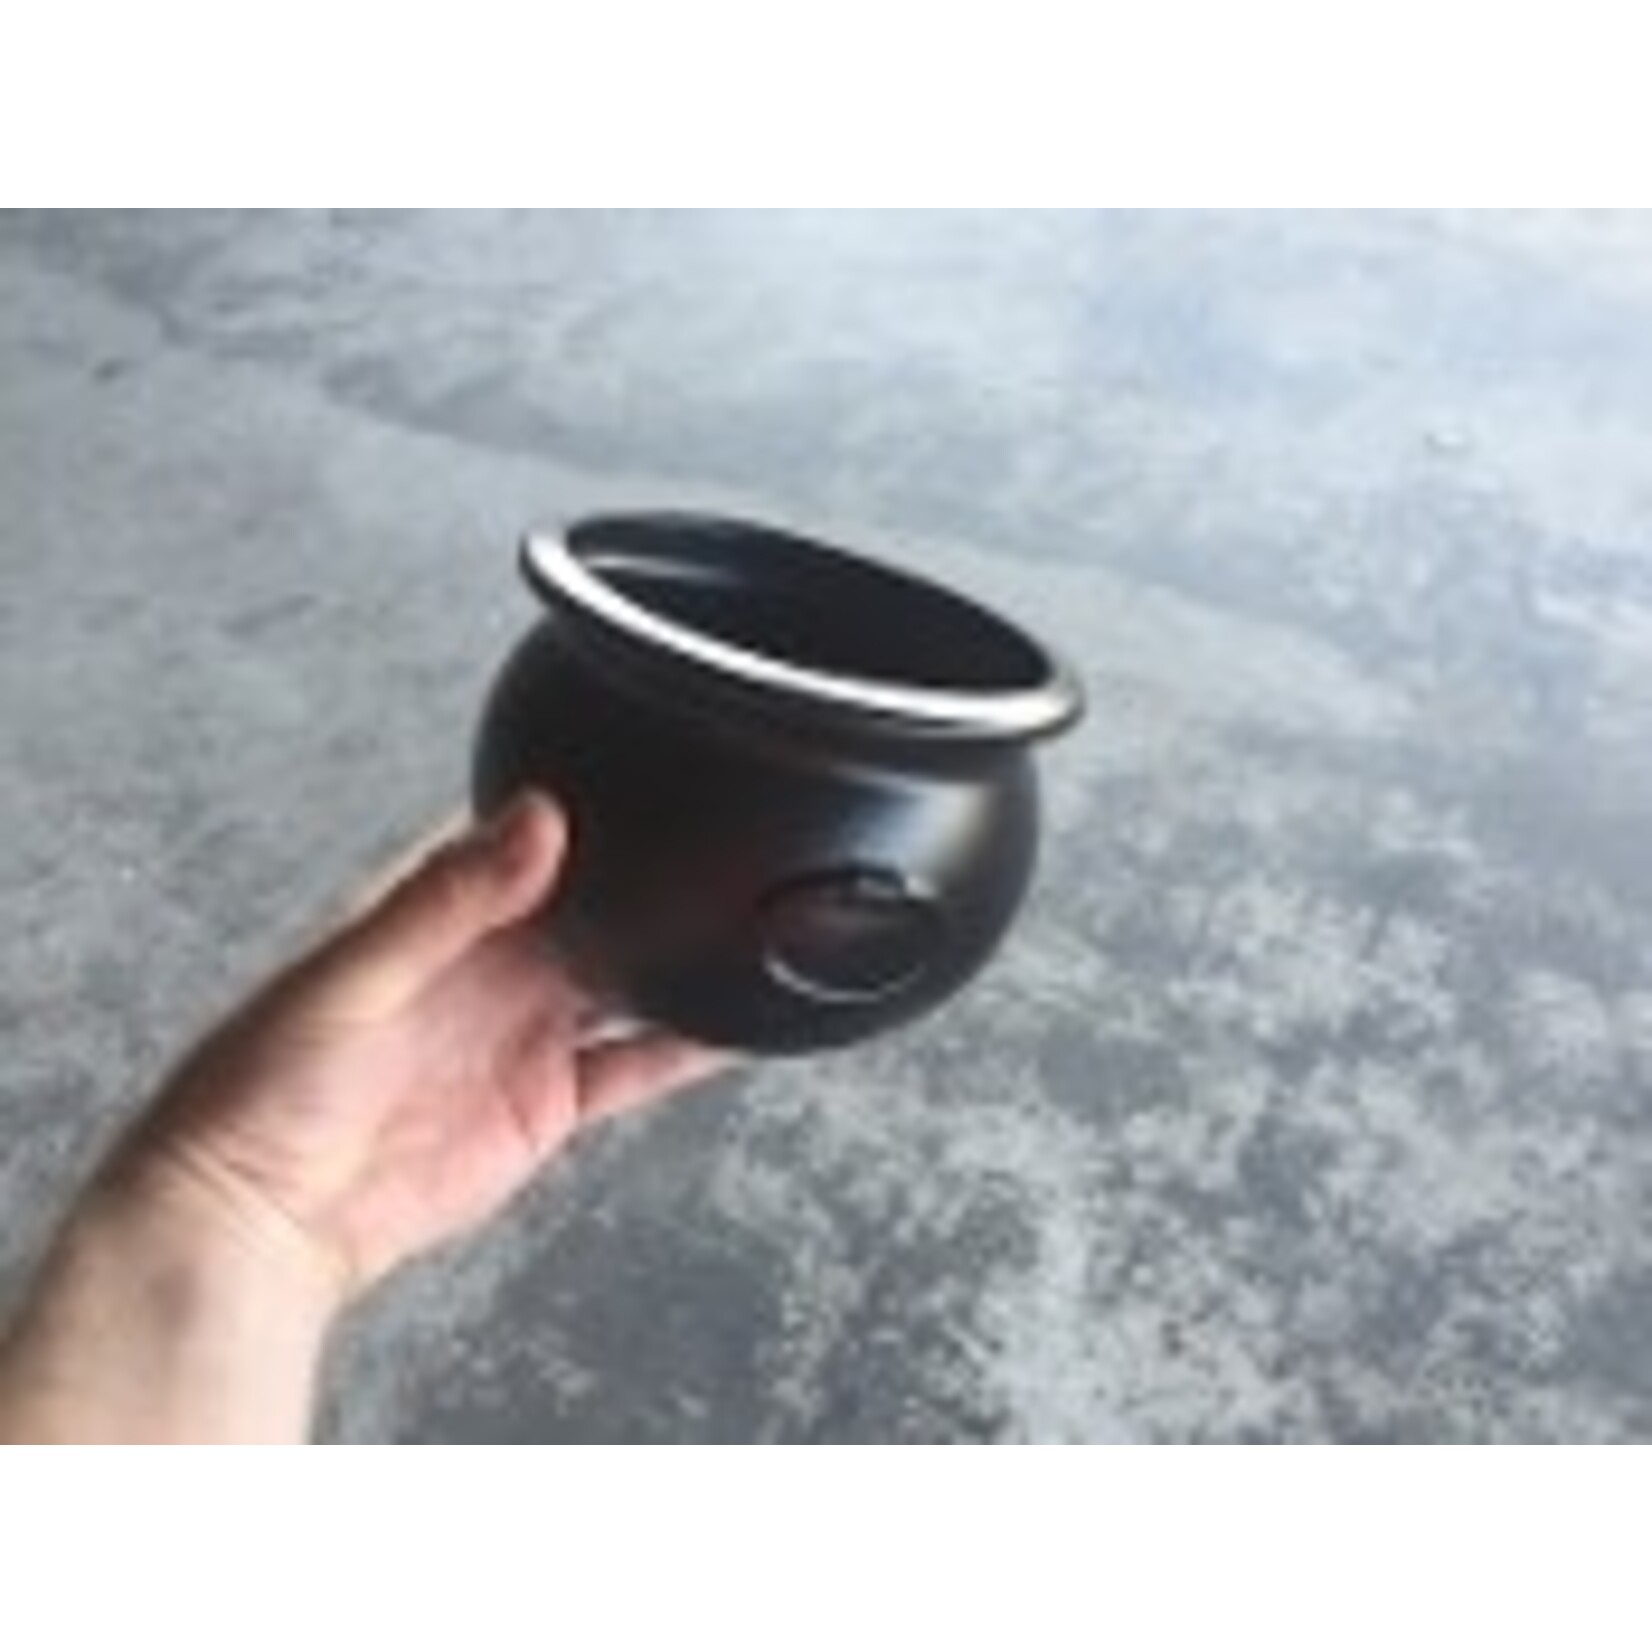 Blinky Products 6" Black Plastic Witches Cauldron - 1ct.